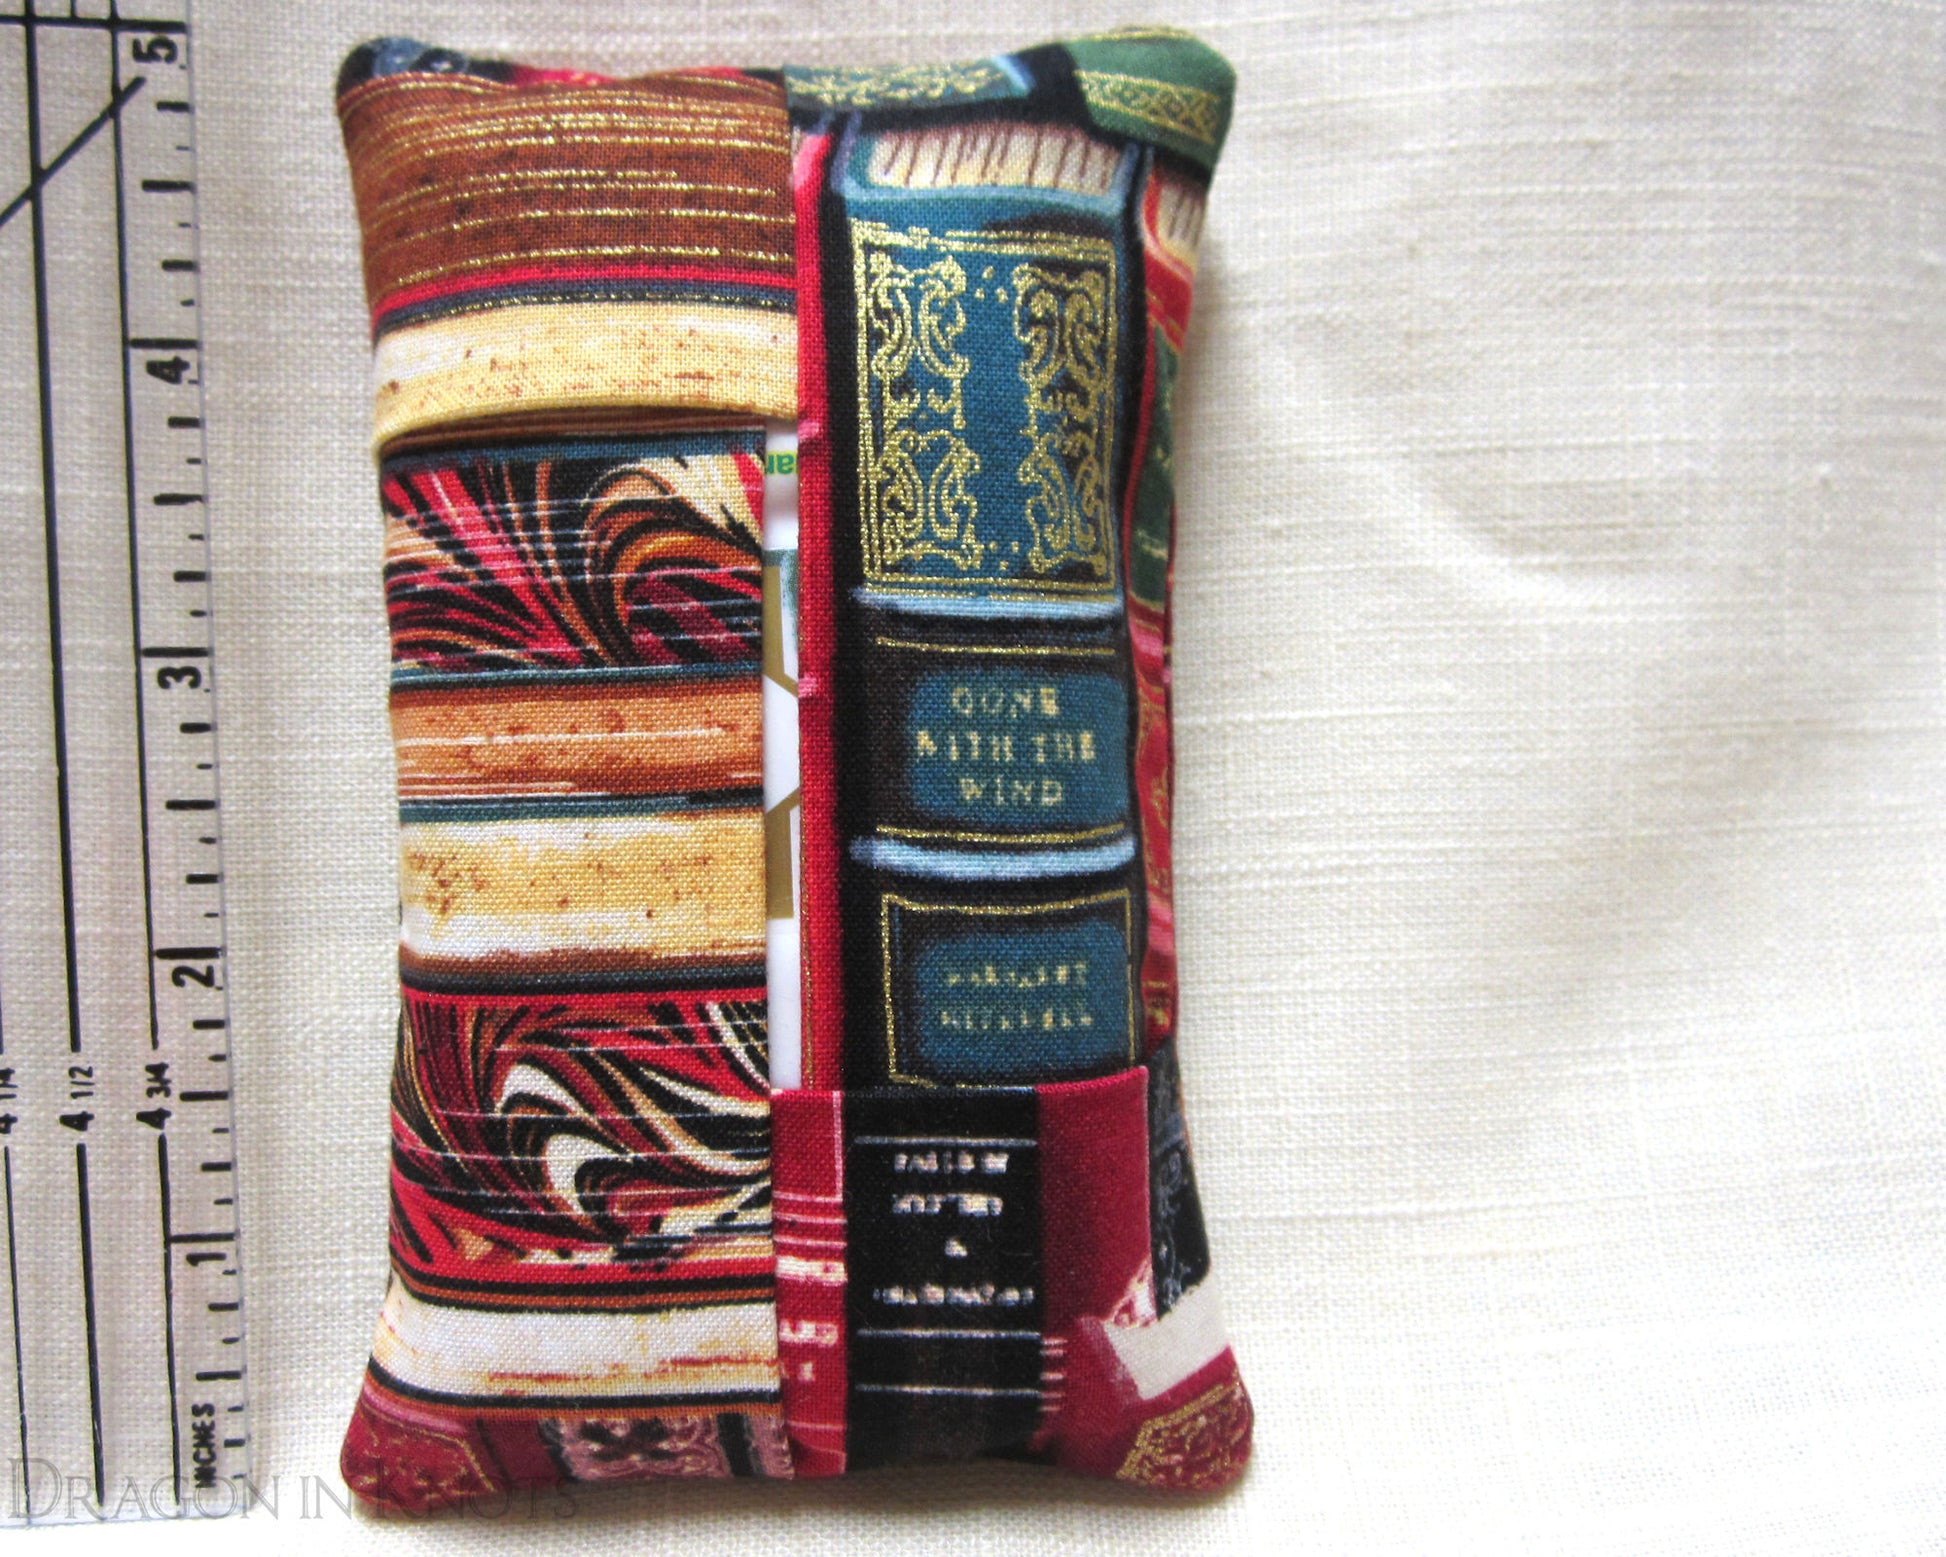 Old Books To-Go Facial Tissue Holder - Dragon in Knots, handmade in USA